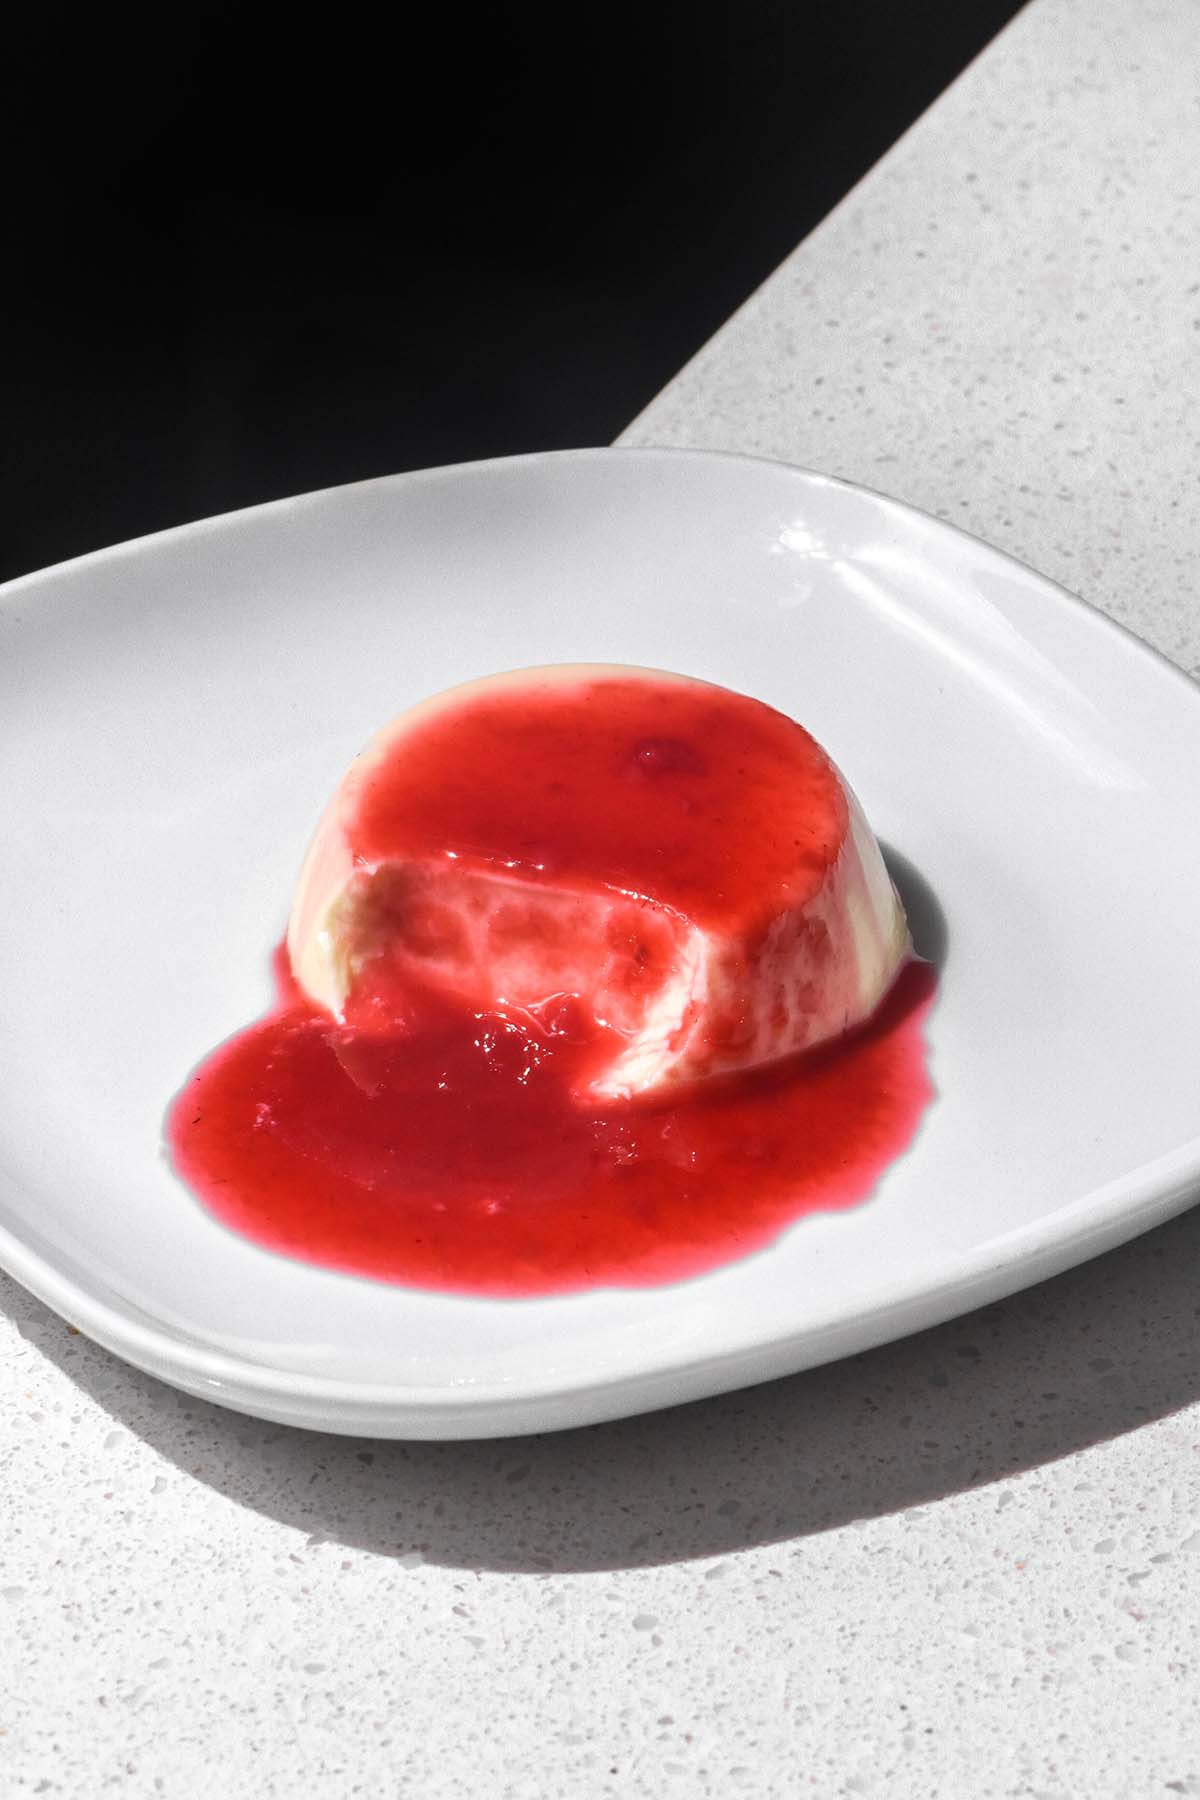 A side on image of a panna cotta topped with raspberry coulis on a white plate against a contrasting black and white backdrop. A spoon has been taken from the panna cotta, revealing the creamy insides. 